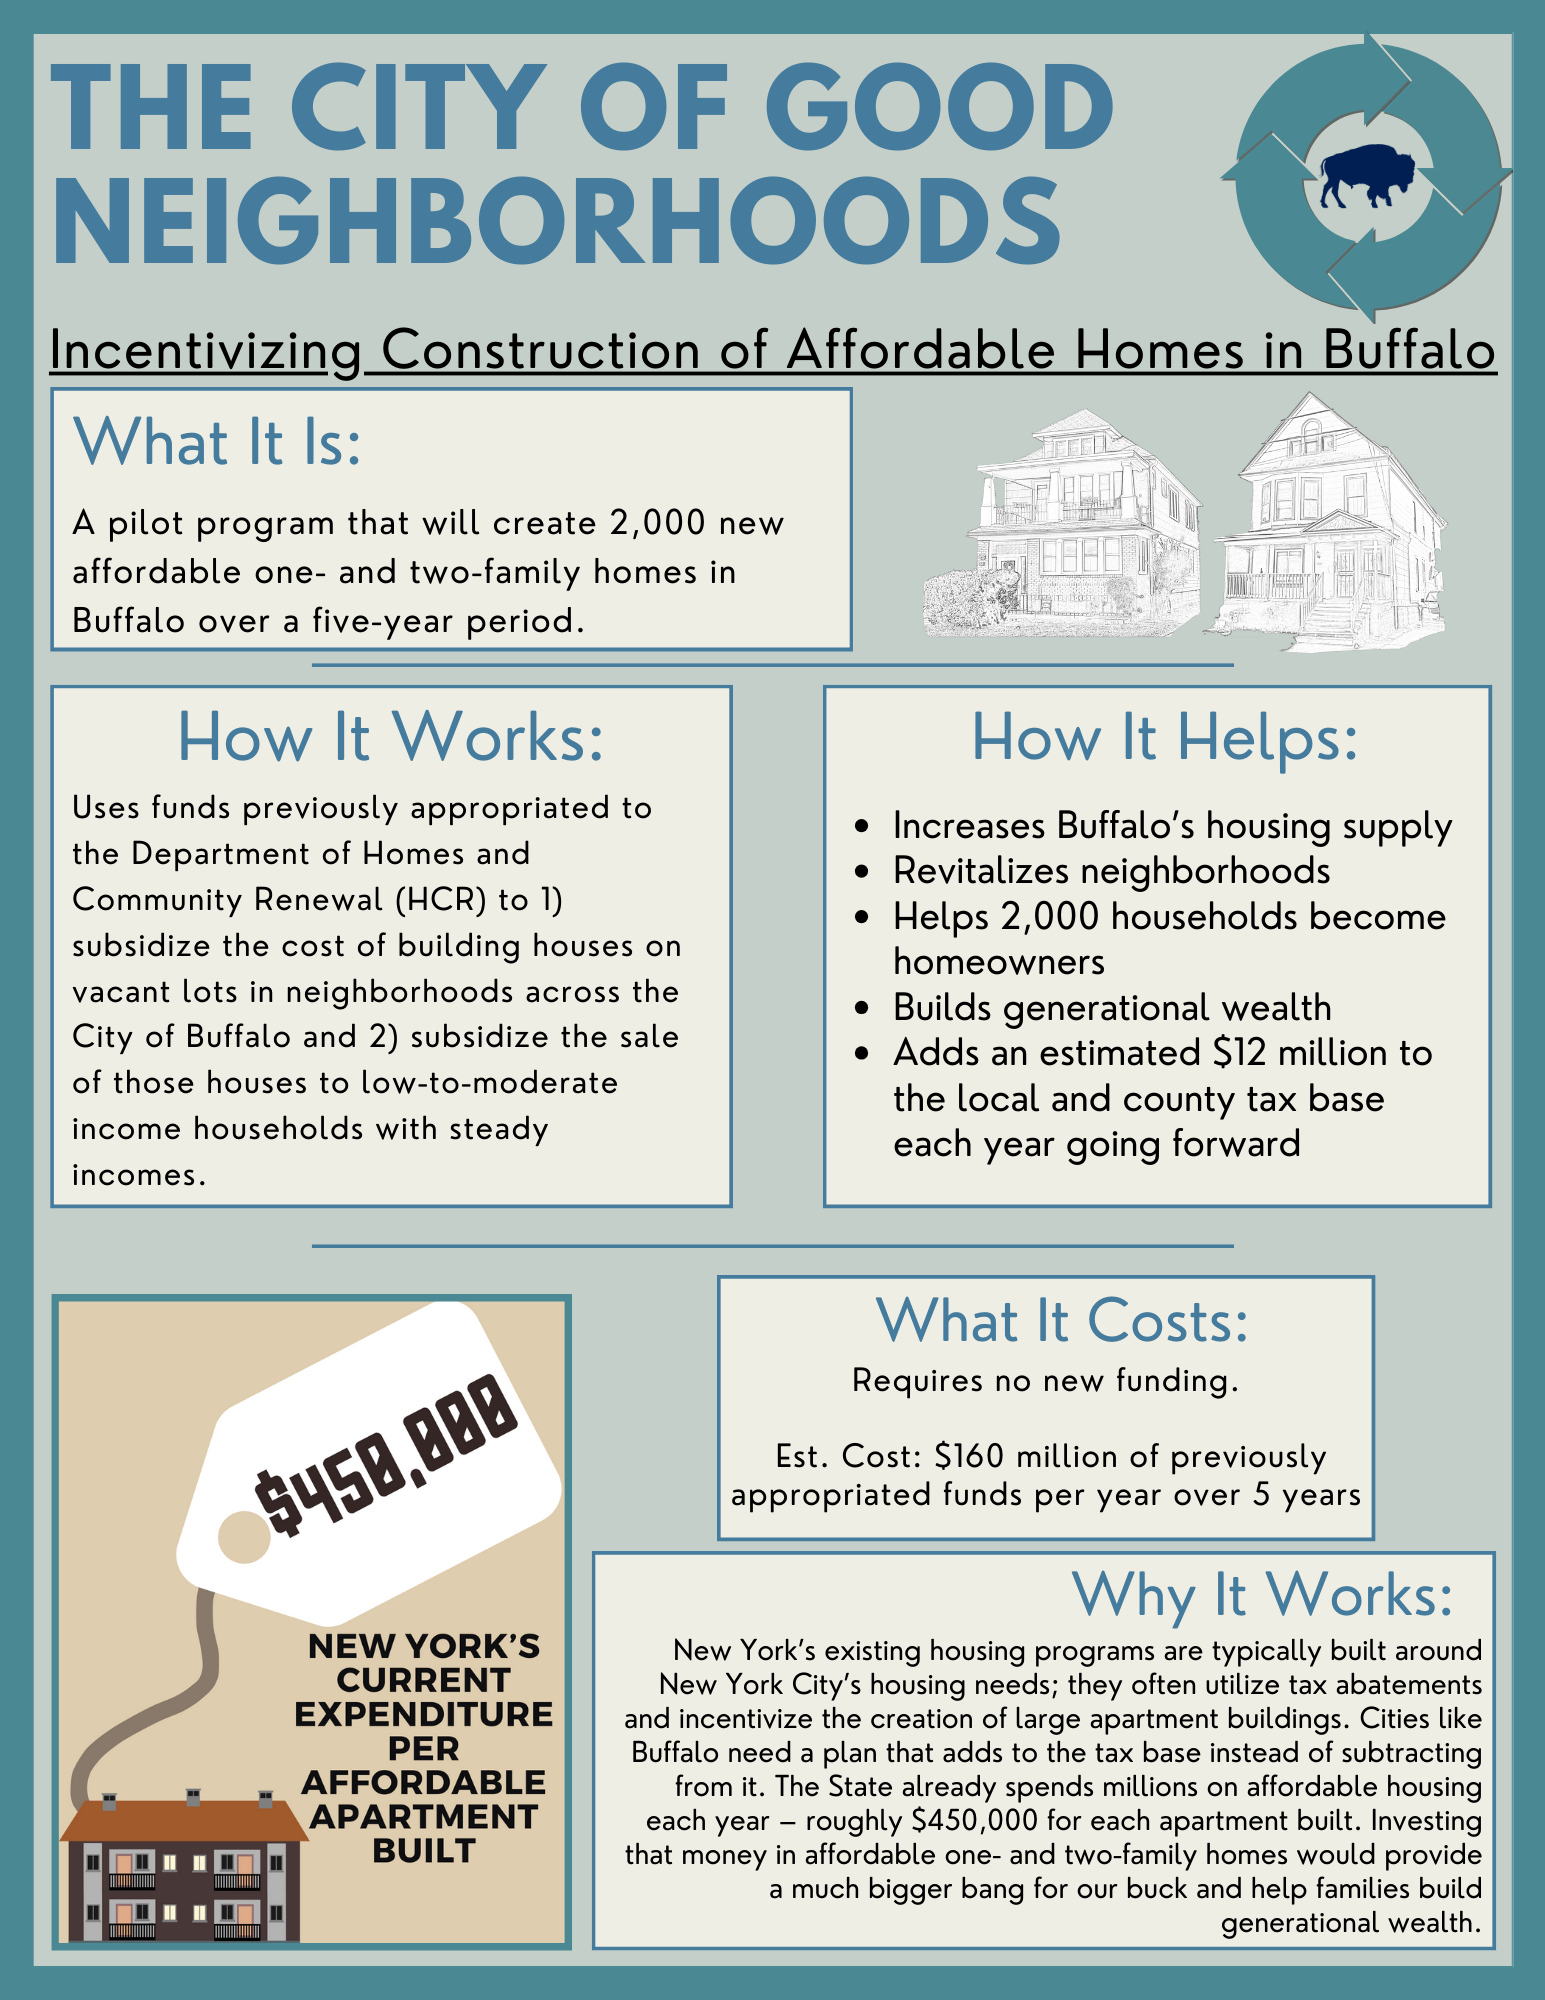 Incentivizing Construction of Affordable Homes in Buffalo What It Is: A pilot program that will create 2,000 new affordable one- and two-family homes in Buffalo over a five-year period.  How It Works: Uses funds previously appropriated to the Department of Homes and Community Renewal (HCR) to 1) subsidize the cost of building houses on vacant lots in neighborhoods across the City of Buffalo and 2) subsidize the sale of those houses to low-to-moderate income households with steady incomes.  How It Helps: Uses funds previously appropriated to the Department of Homes and Community Renewal (HCR) to 1) subsidize the cost of building houses on vacant lots in neighborhoods across the City of Buffalo and 2) subsidize the sale of those houses to low-to-moderate income households with steady incomes.  What It Costs: Requires no new funding. Est. Cost: $160 million of previously appropriated funds per year over 5 years  Why It Works: New York’s existing housing programs are typically built around New York City’s housing needs; they often utilize tax abatements and incentivize the creation of large apartment buildings. Cities like Buffalo need a plan that adds to the tax base instead of subtracting from it. The State already spends millions on affordable housing each year – roughly $450,000 for each apartment built. Investing that money in affordable one- and two- family homes would provide a much bigger bang for our buck and help families build generational wealth.